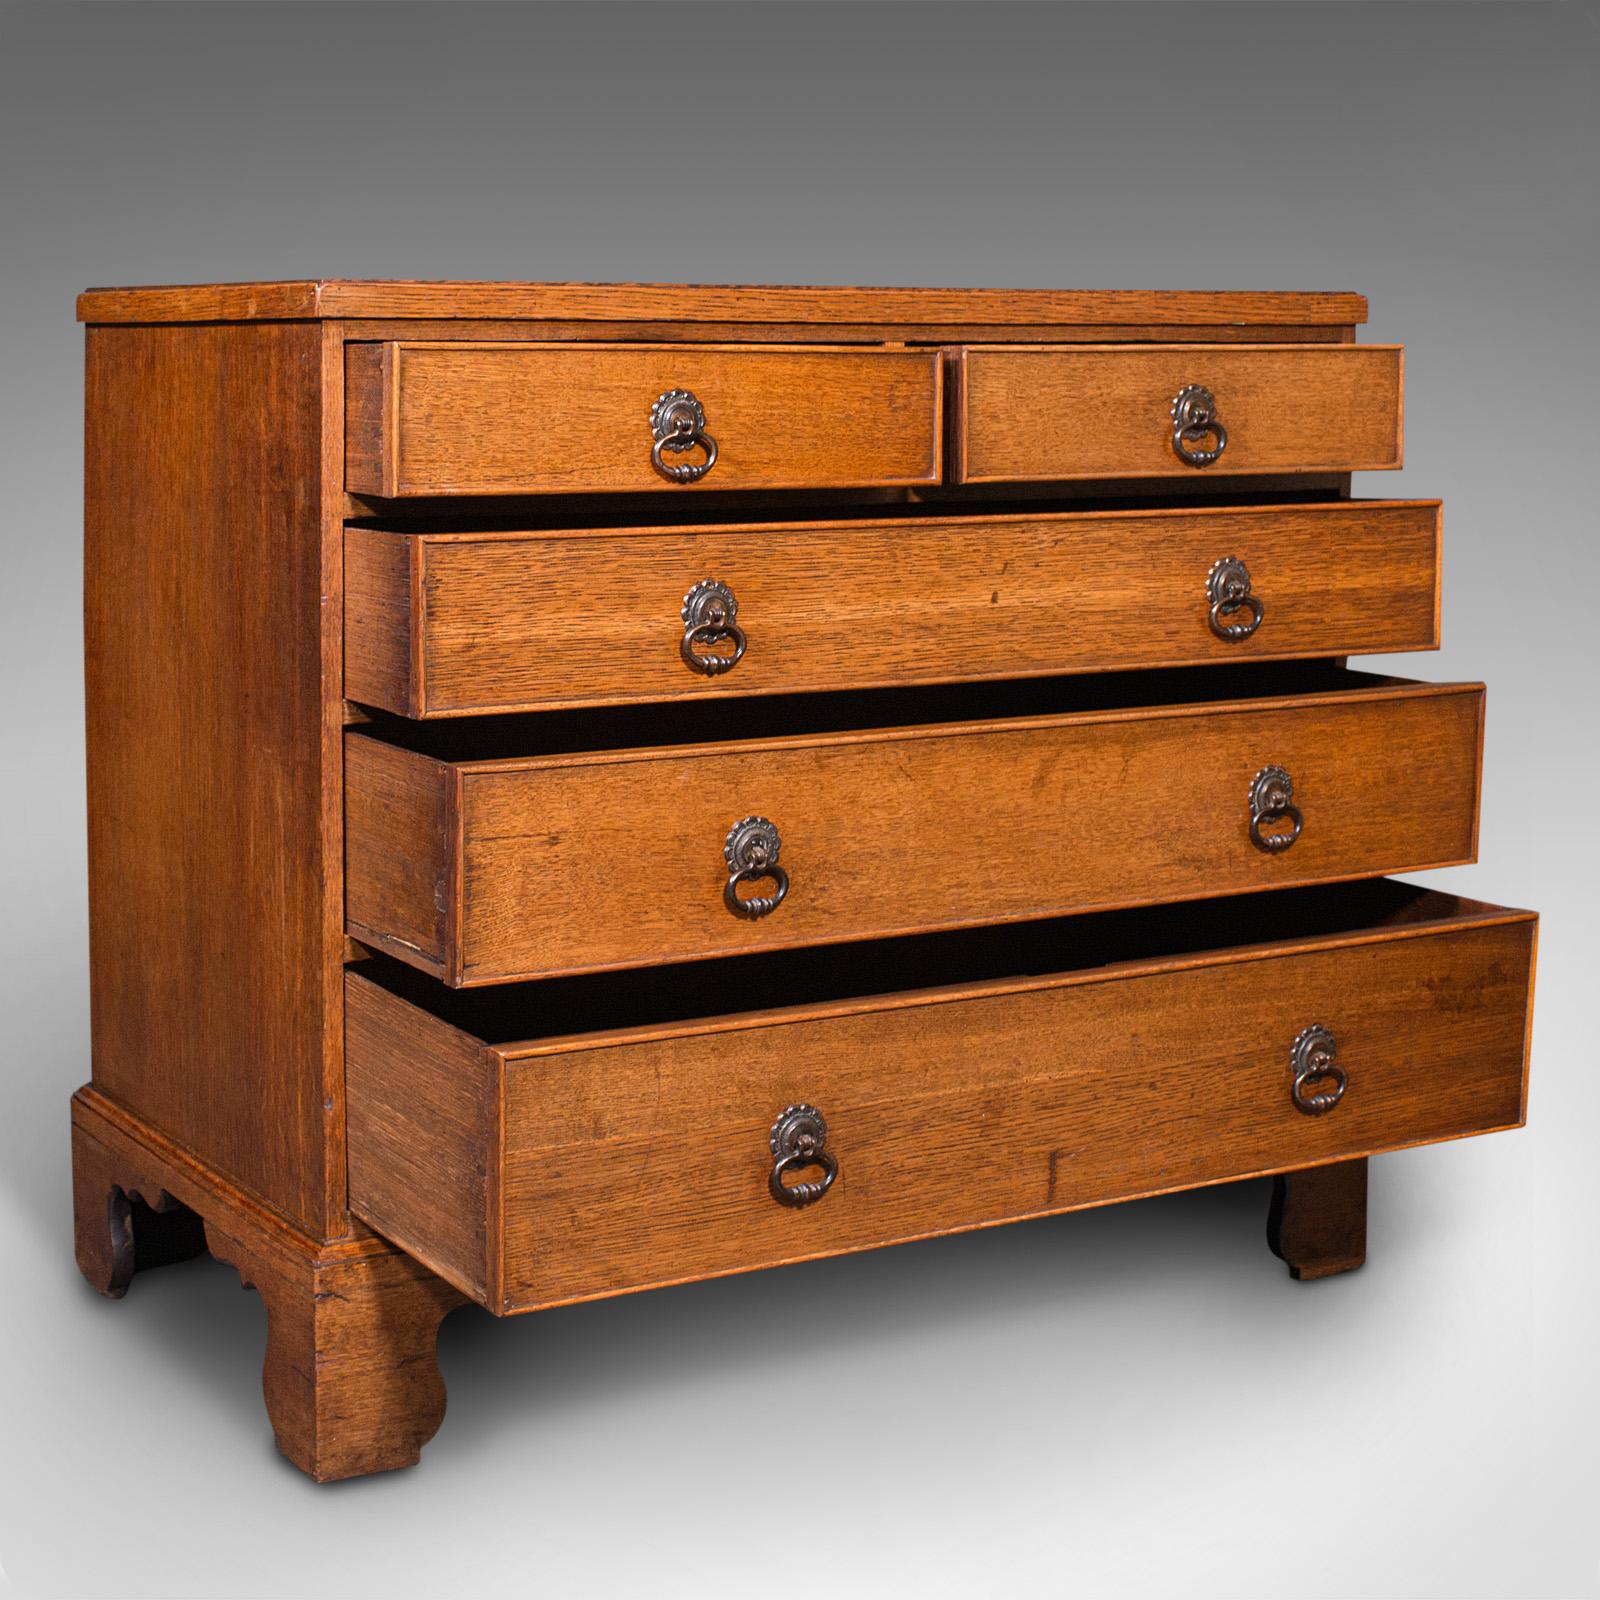 This is an antique gentleman's chest of drawers. An English, oak tallboy of squat proportion, dating to the Georgian period and later, circa 1800.

Wonderfully figured and presenting fine colour
Displaying a desirable aged patina